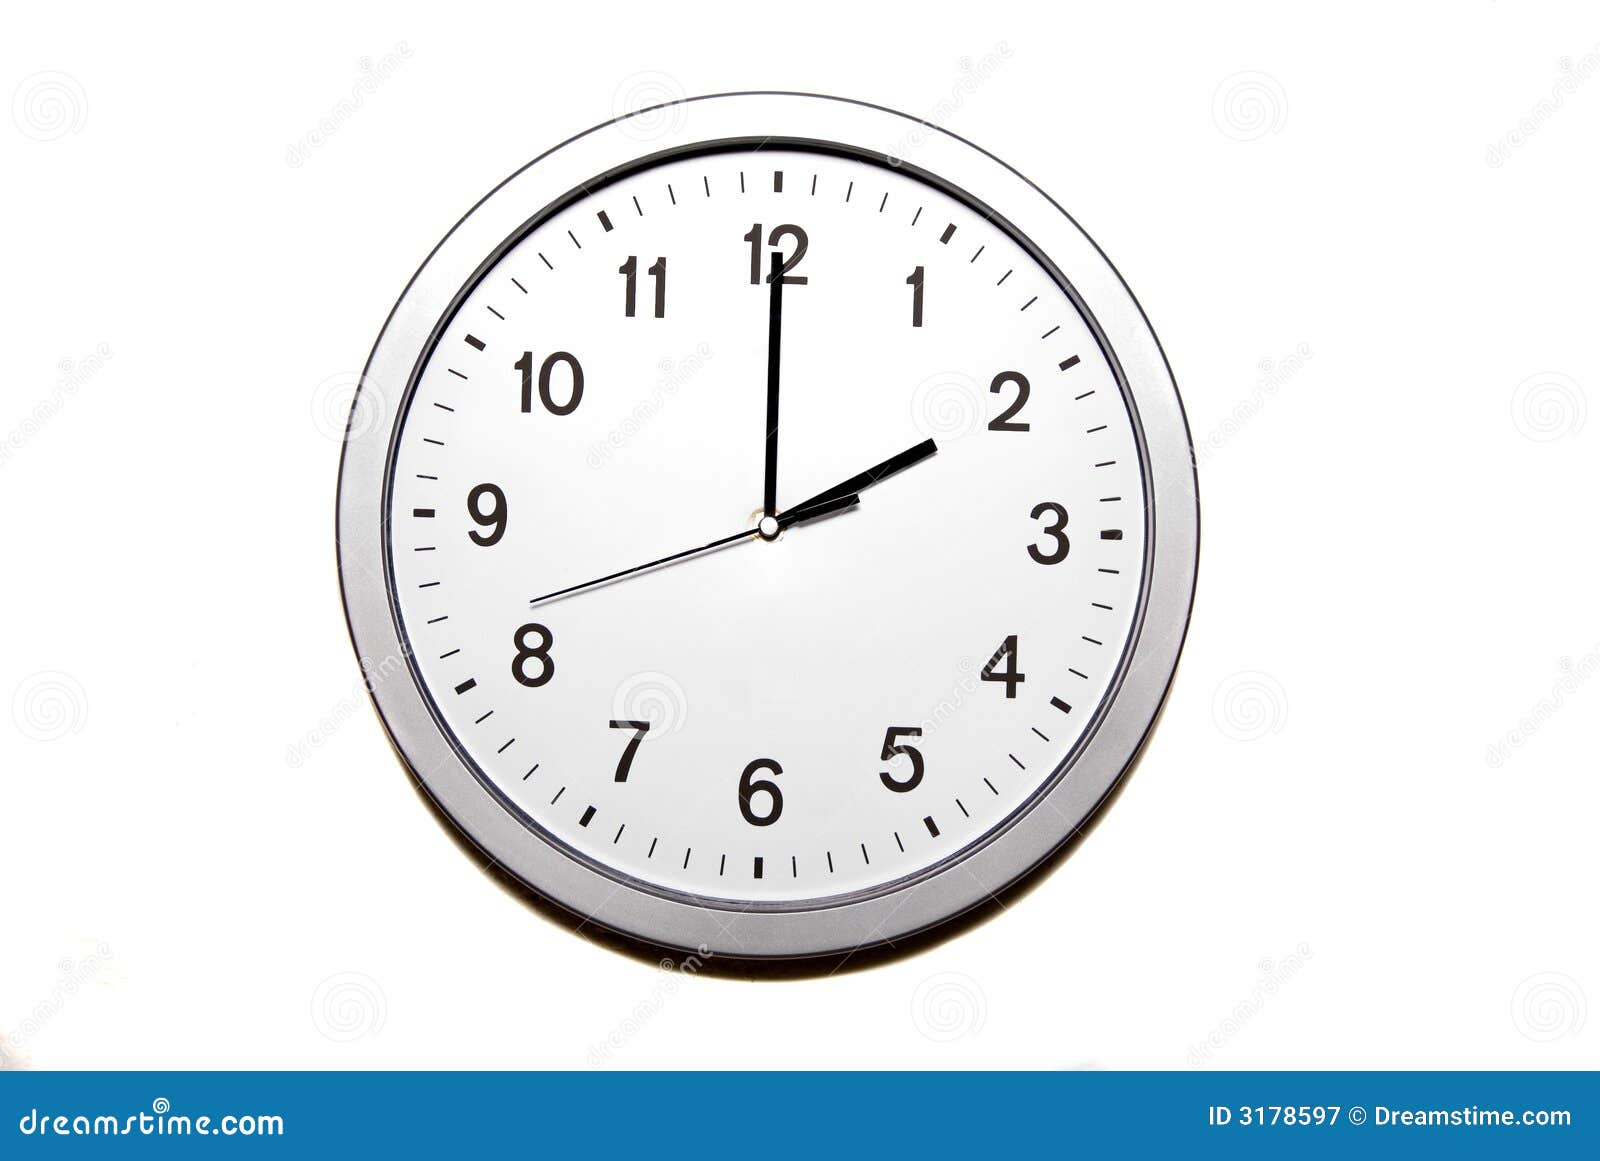 clipart two o'clock - photo #7